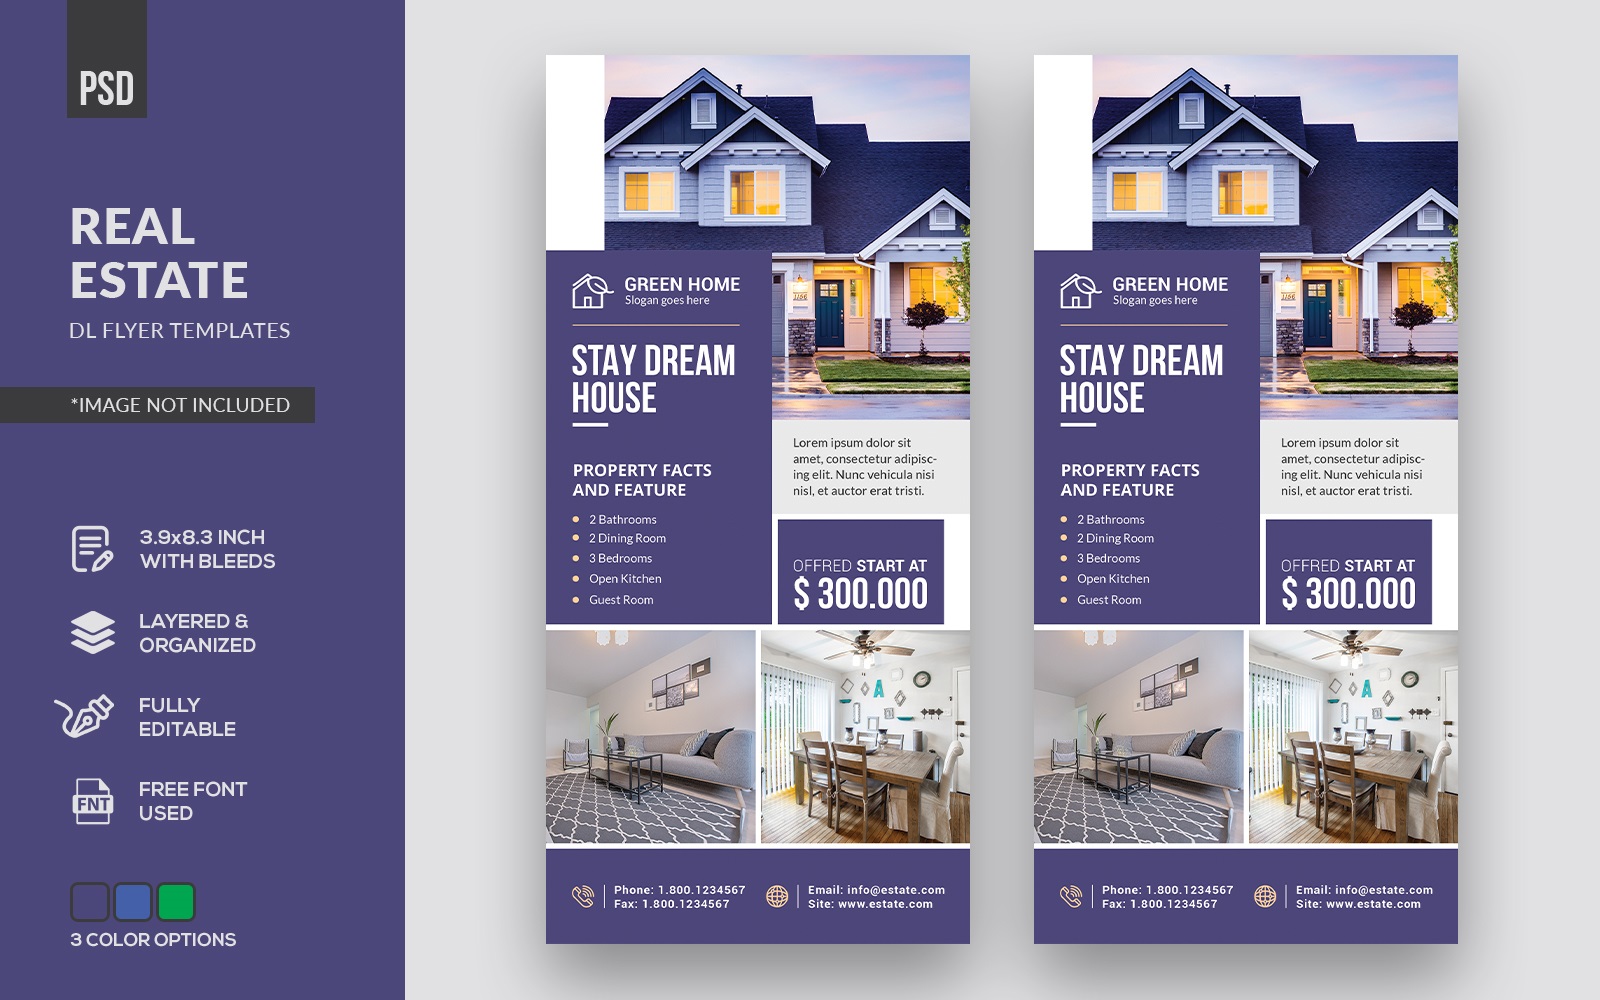 Real Estate DL Flyer' - Corporate Identity Template